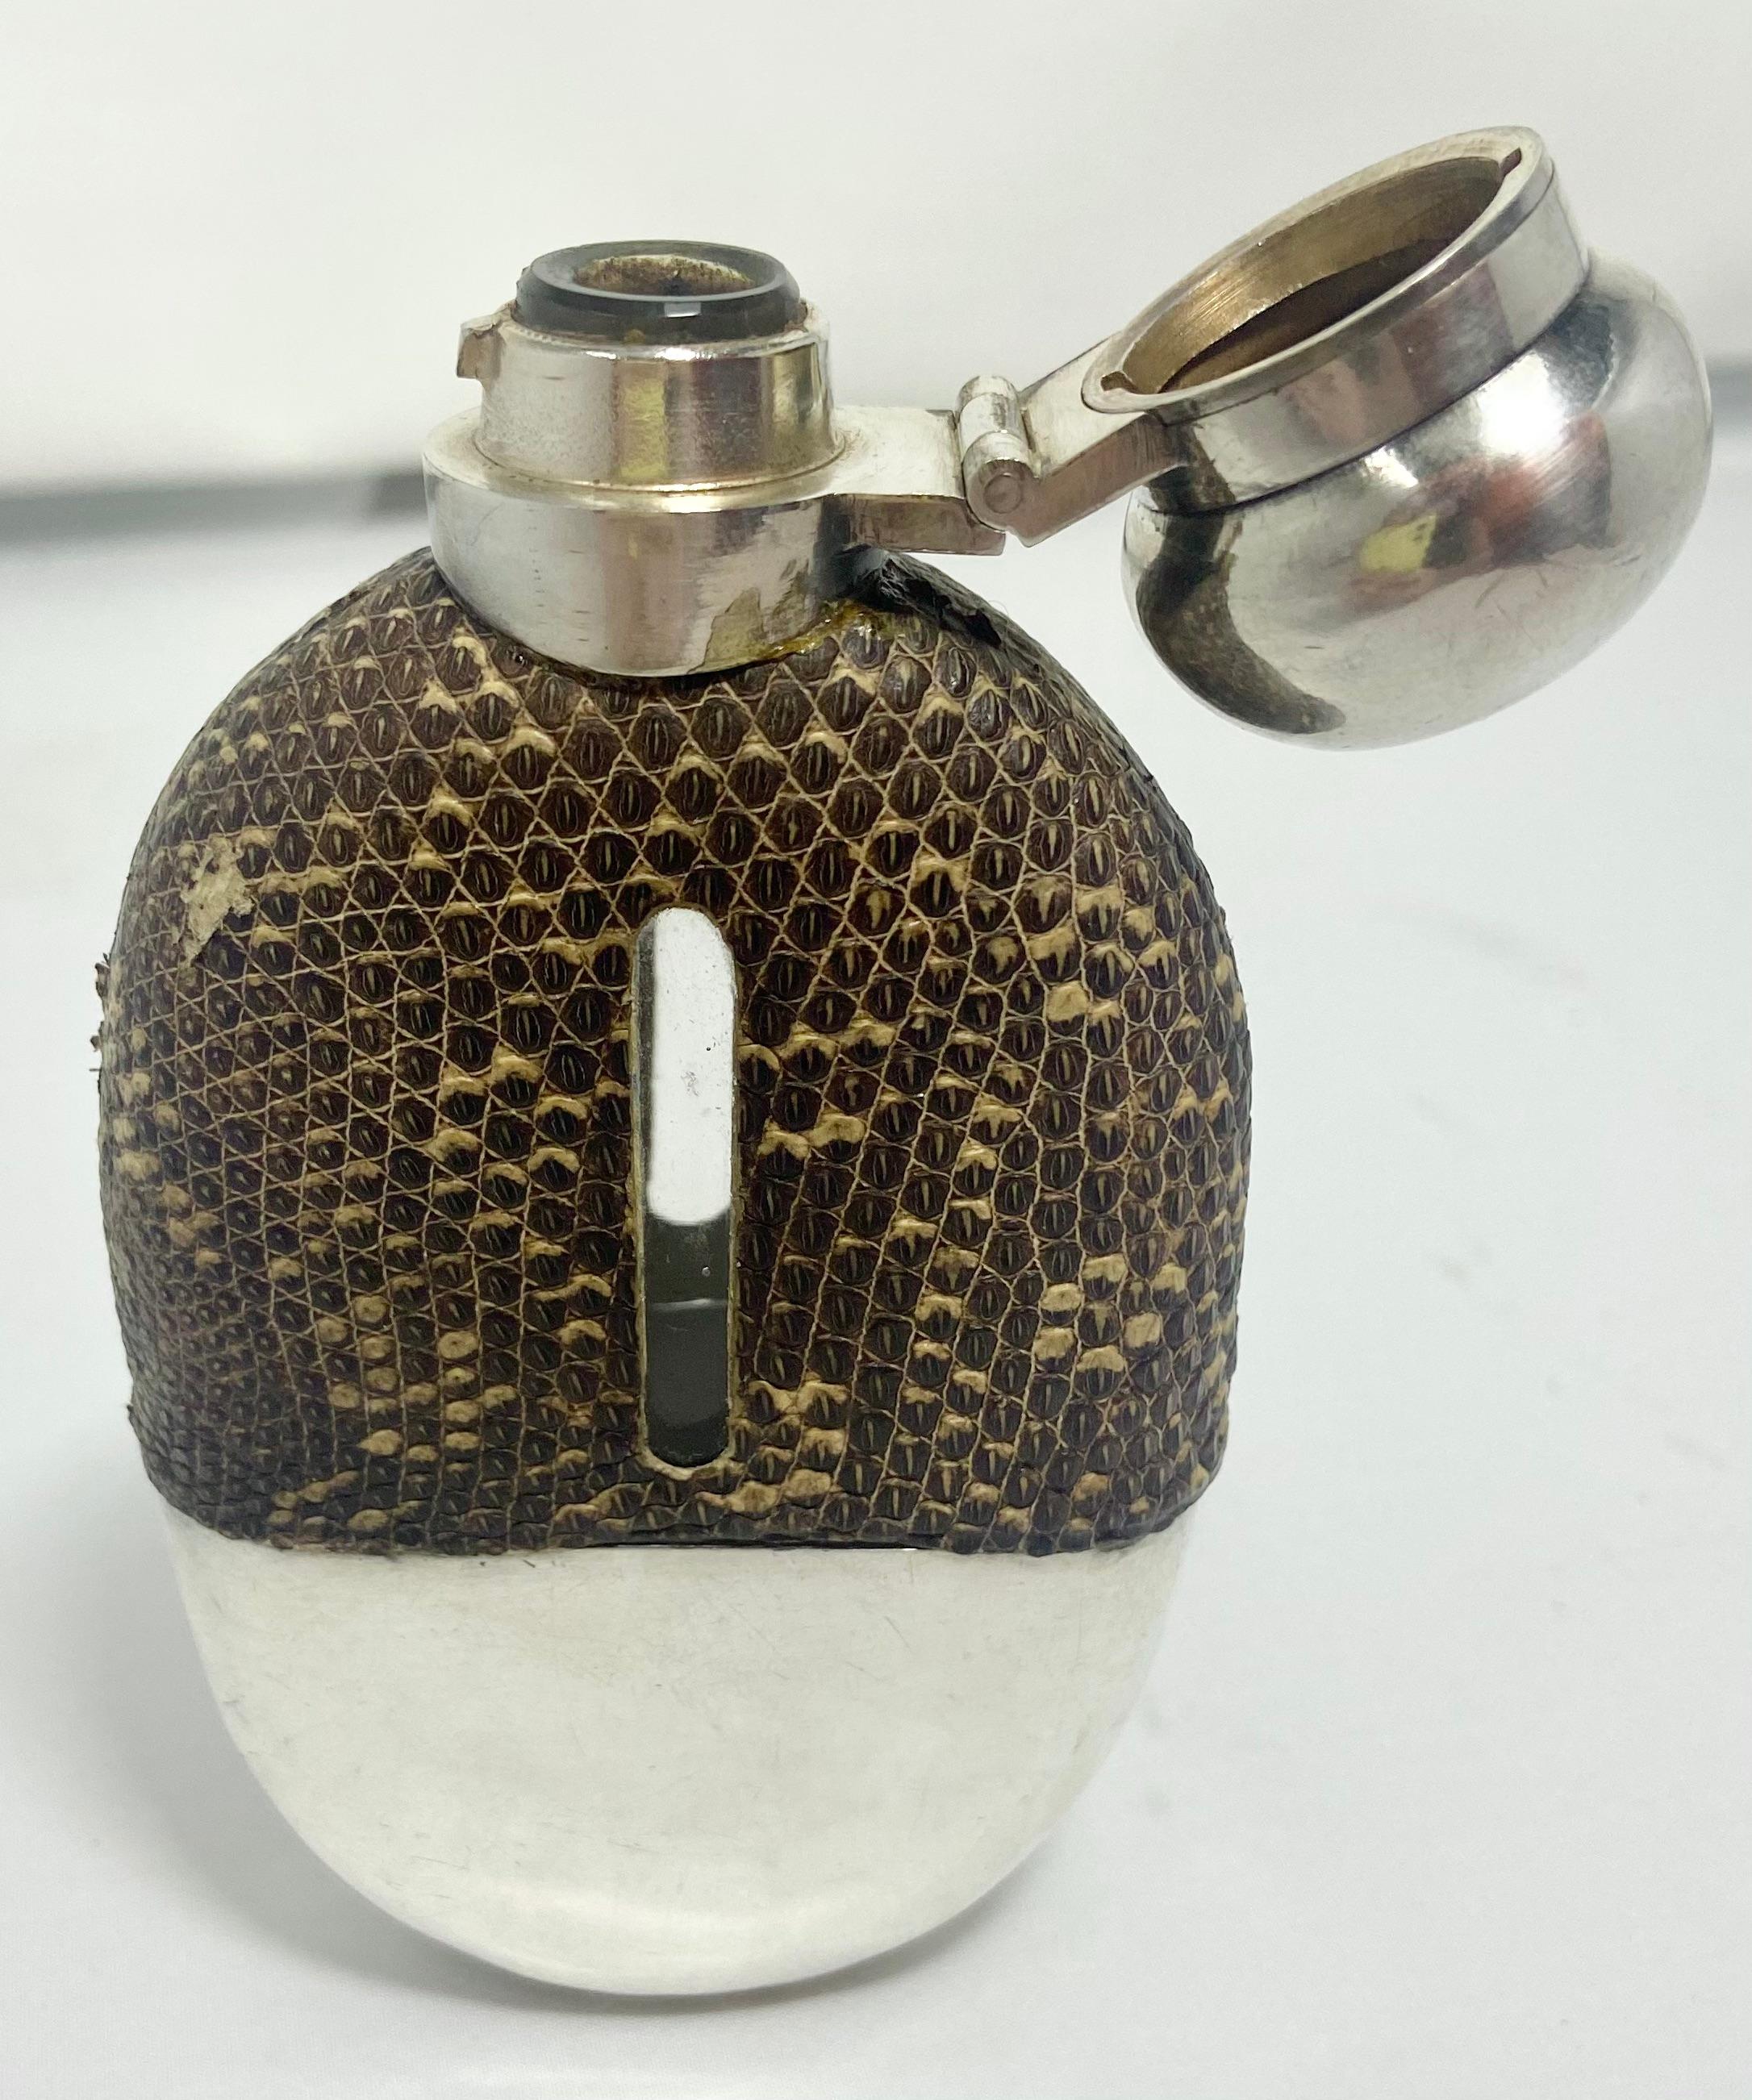 Antique English silver-plate and snakeskin hip flask, Circa 1900.